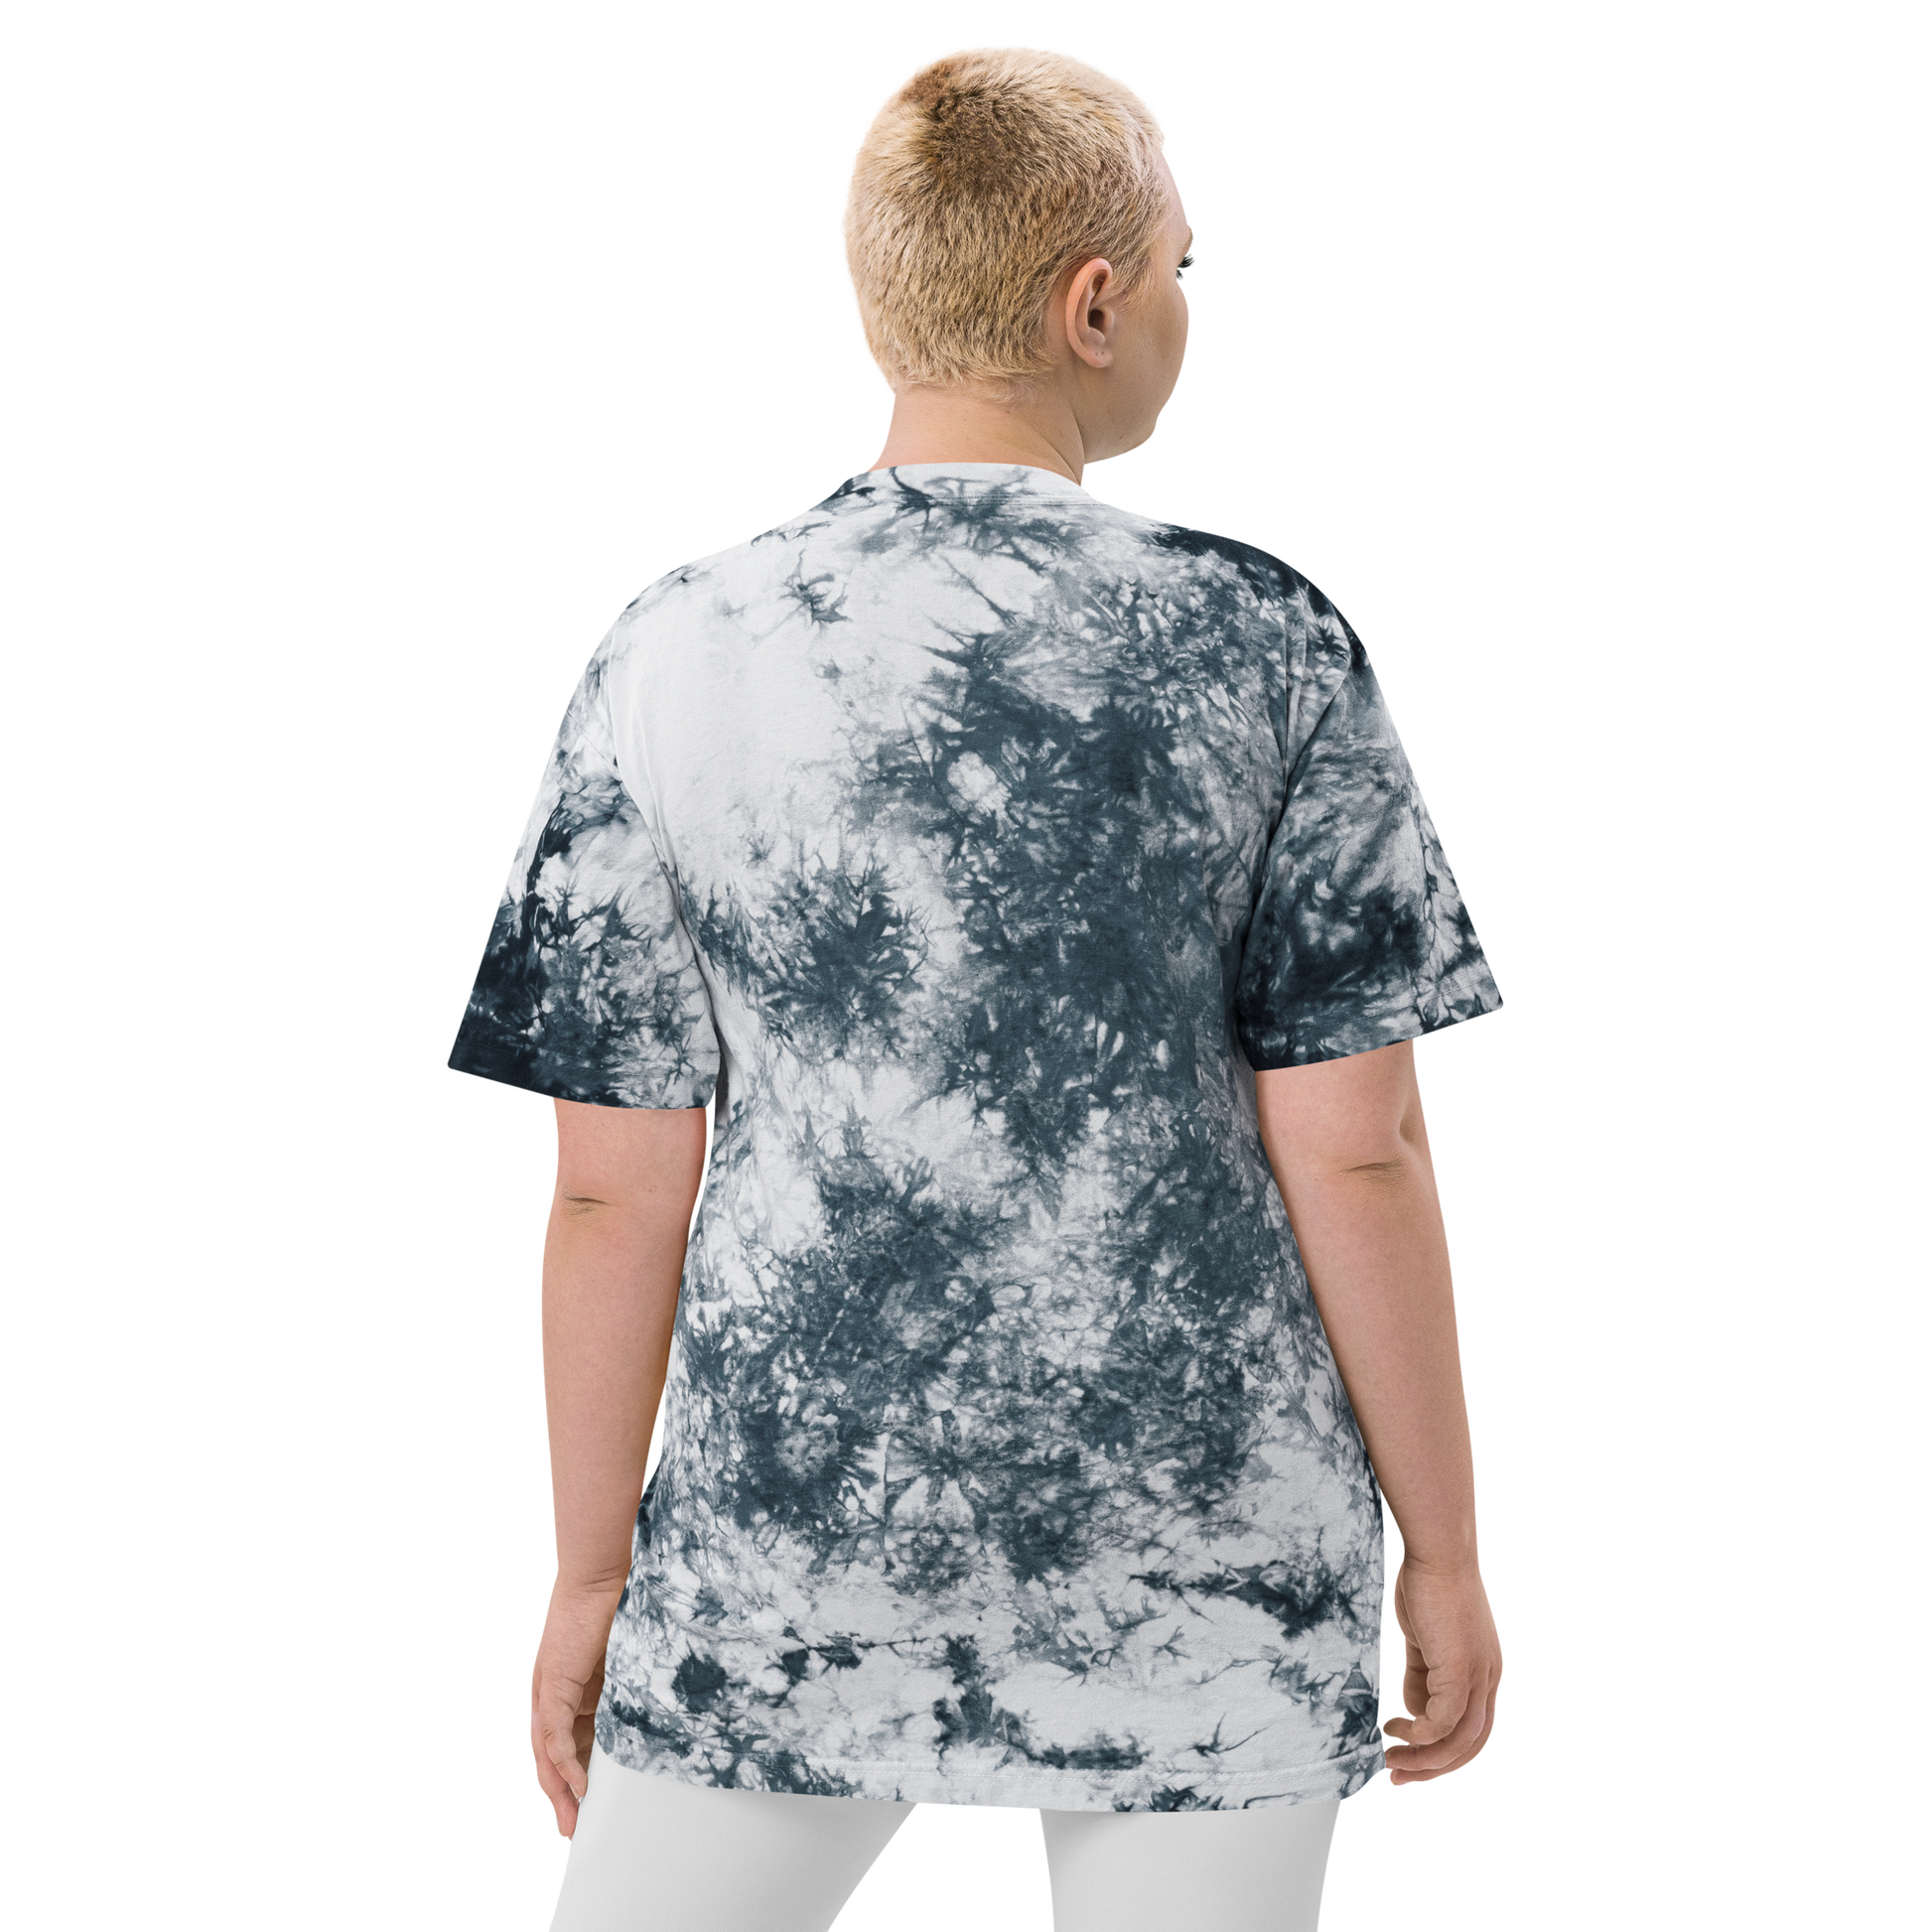 YHM Designs - YYC Calgary Oversized Tie-Dye T-Shirt - Crossed-X Design with Airport Code and Vintage Propliner - White Embroidery - Image 17